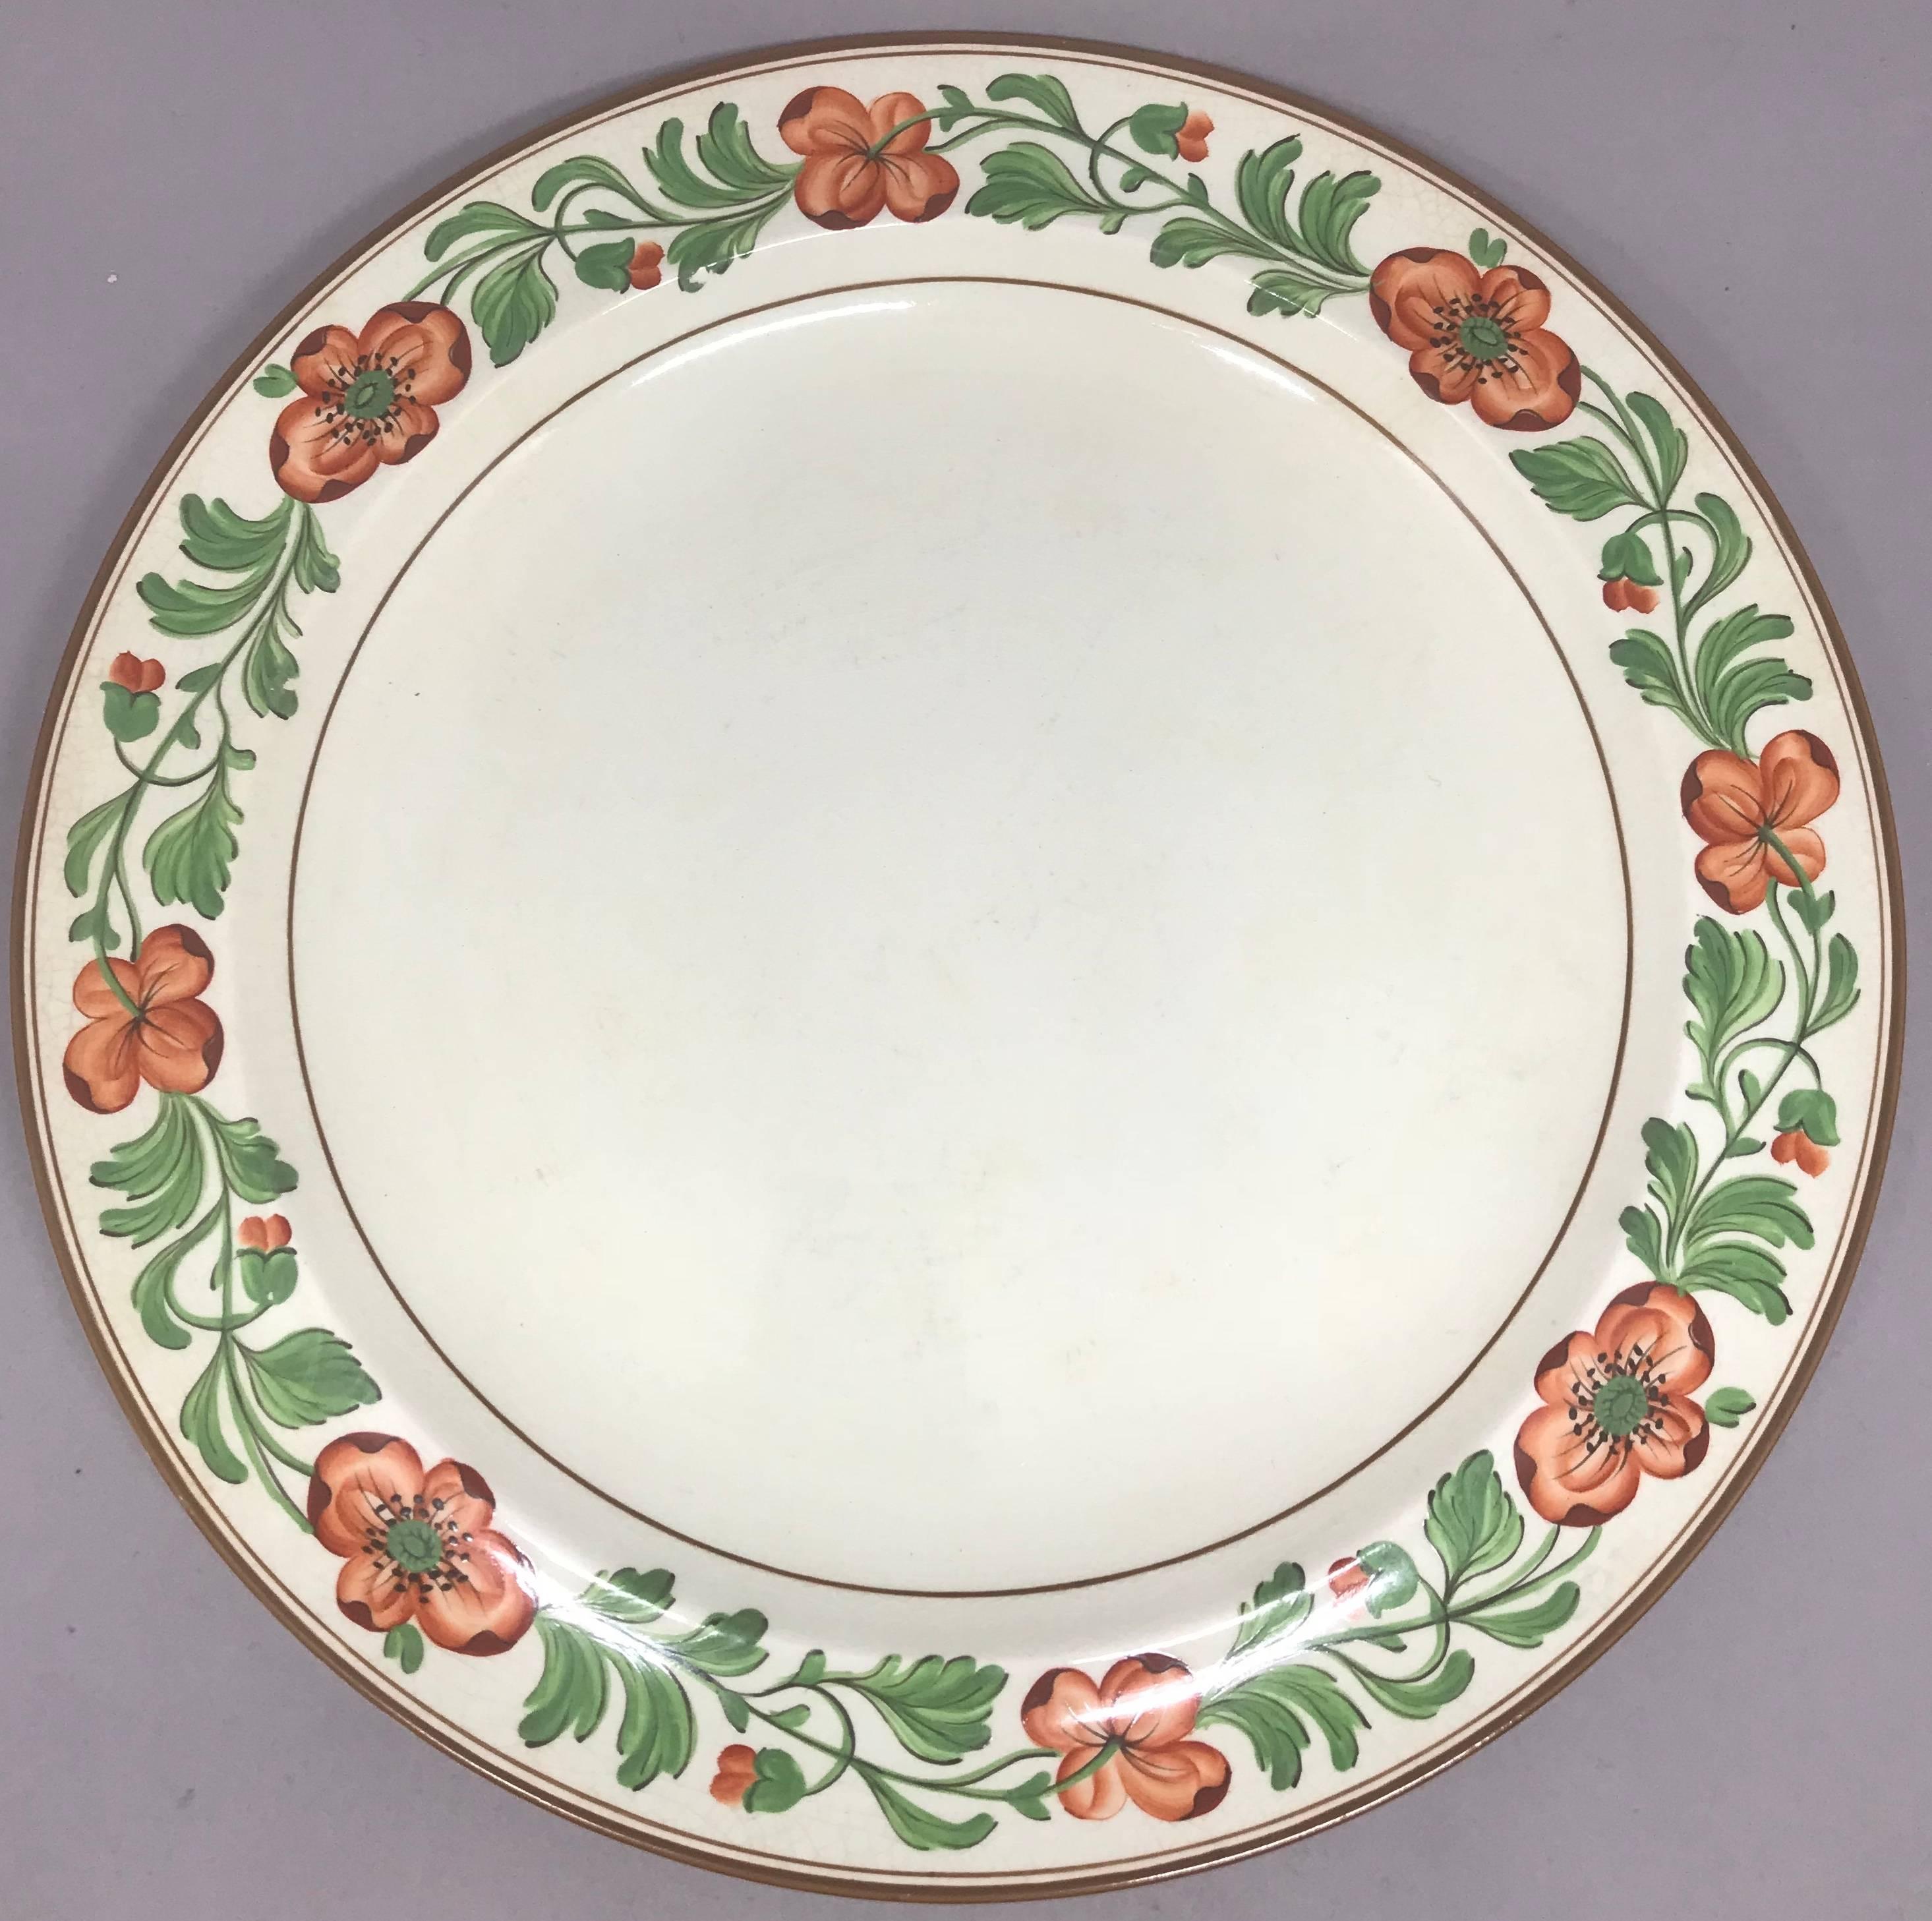 Set of eight Wedgwood creamware plates. Eight large creamware decorated dinner plates with a bold hand-painted floral border in orange and green with brown banding; pattern number A4440 with impressed mark for Wedgwood. England, early 20th